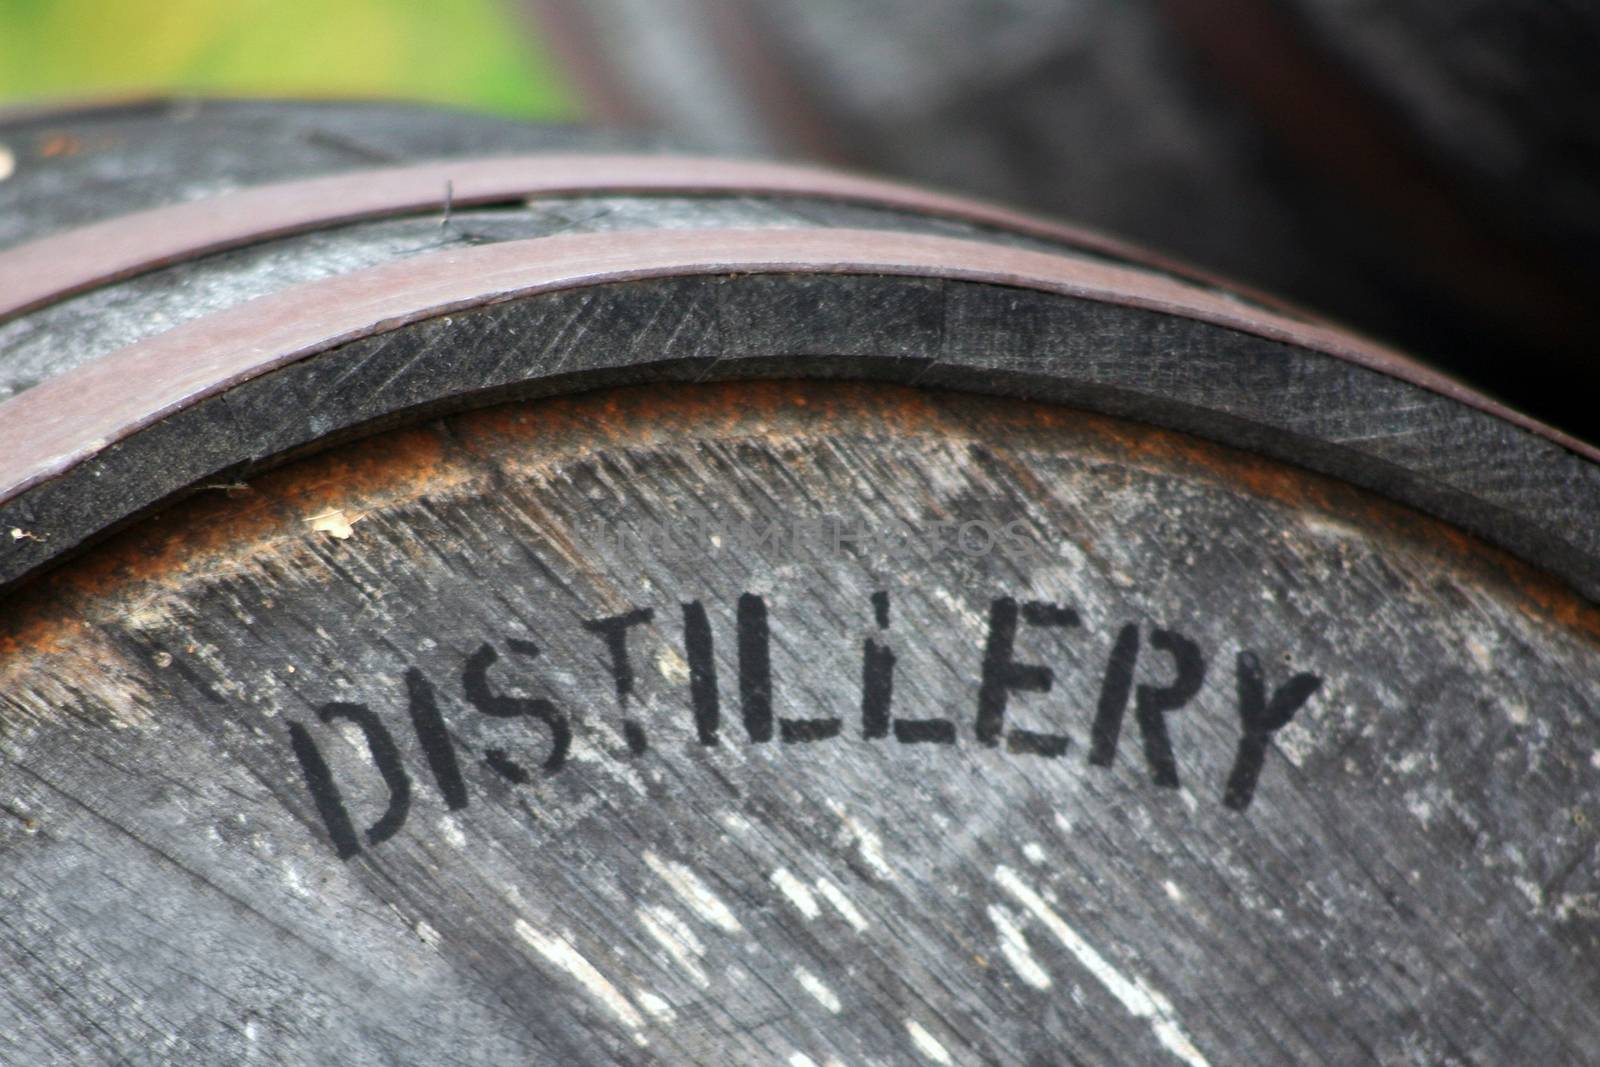 Whiskey, scotch or bourbon is aged in these used oak barrels to enhance the color and flavor of the finished product.